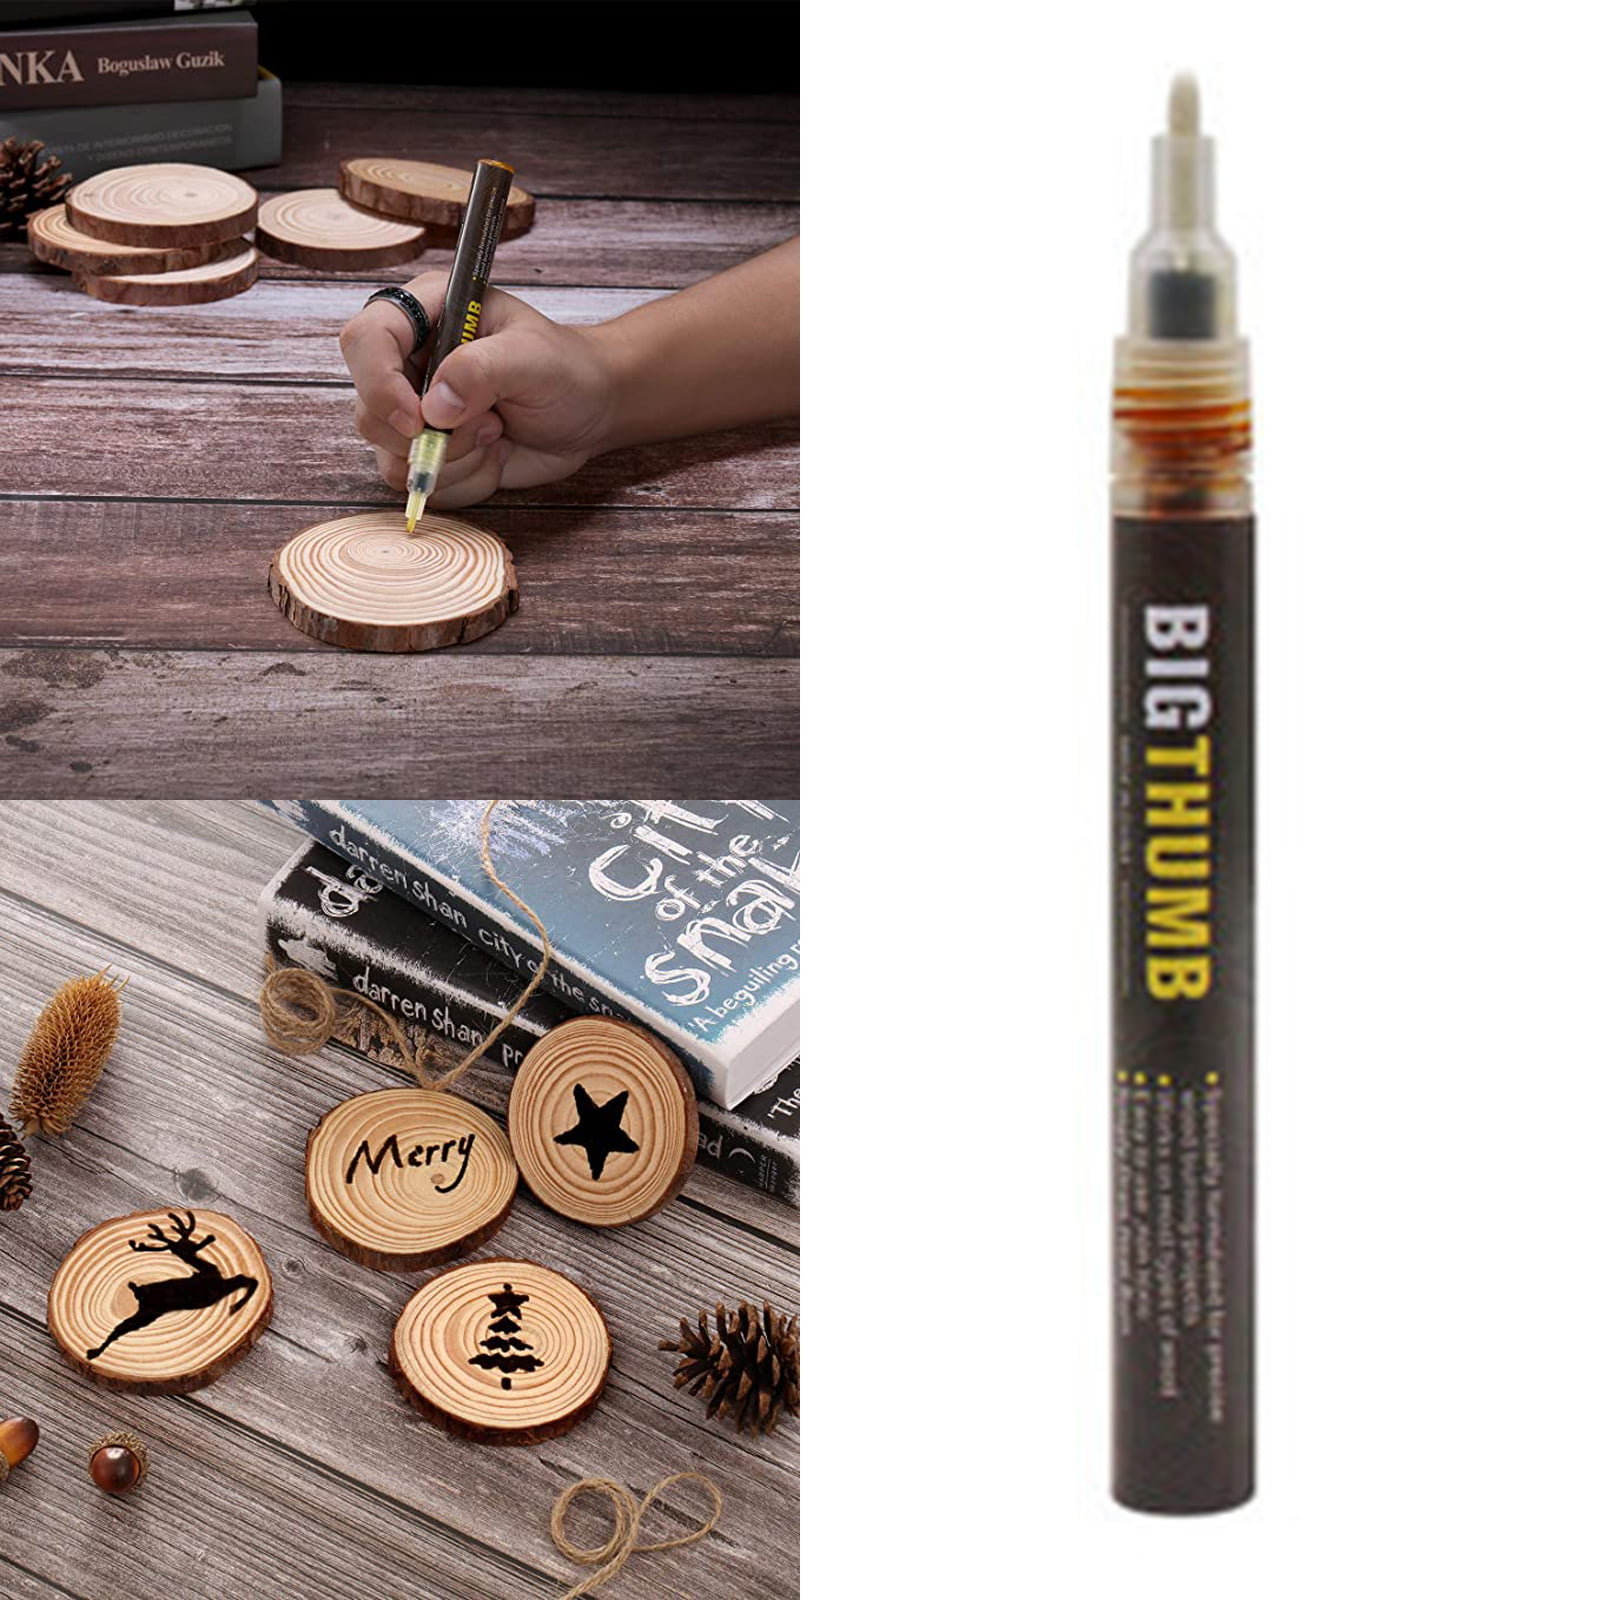 Scorch Marker Chemical Wood Burning Pen For Painting DIY Craft Woodworking  Art Painting Marker Pen Portable